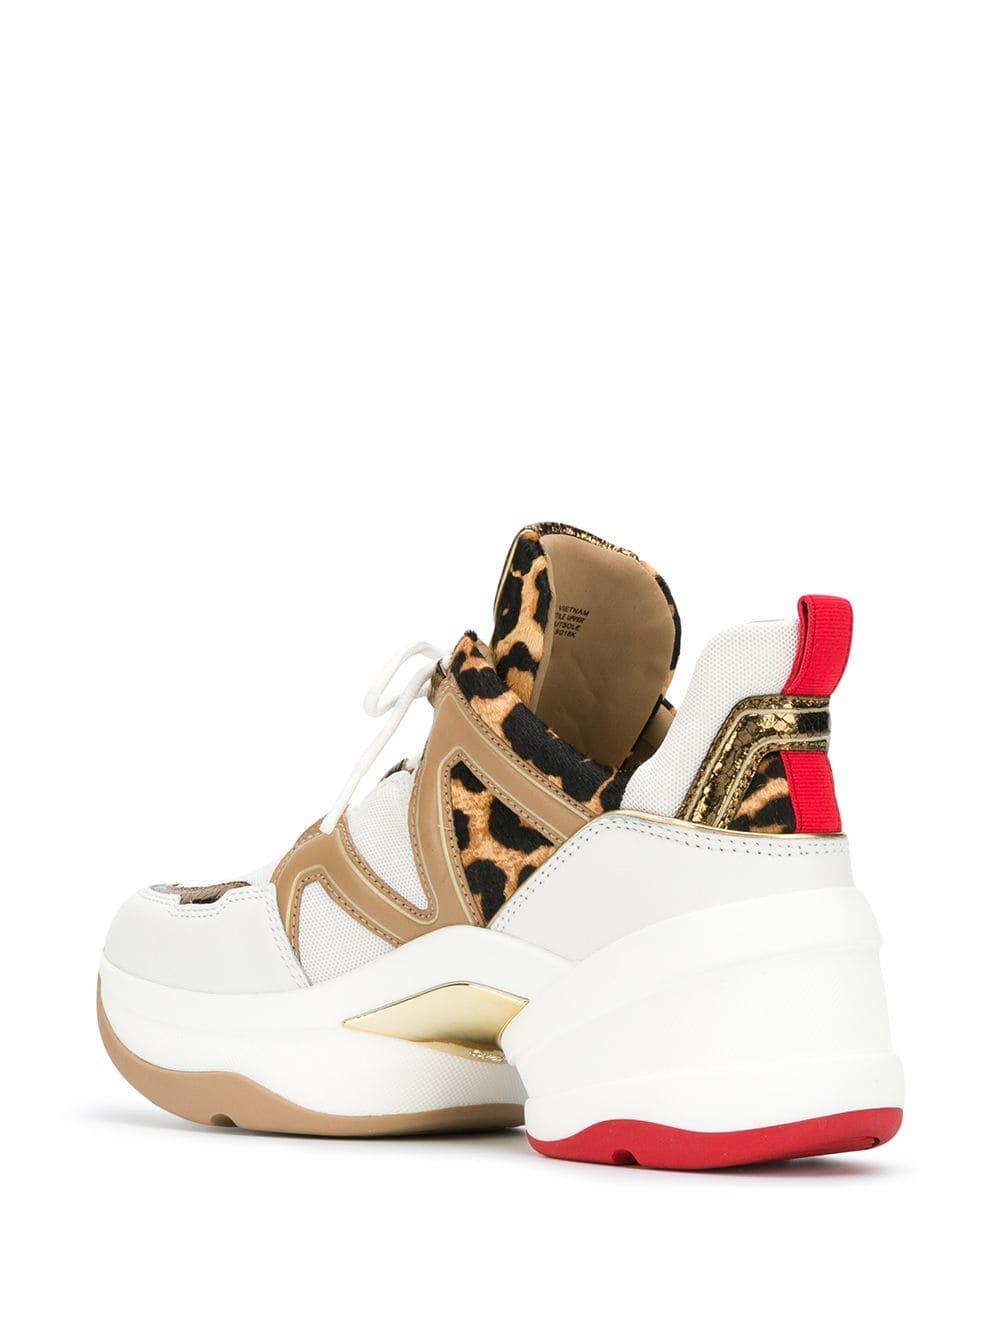 olympia leopard calf hair and leather trainer